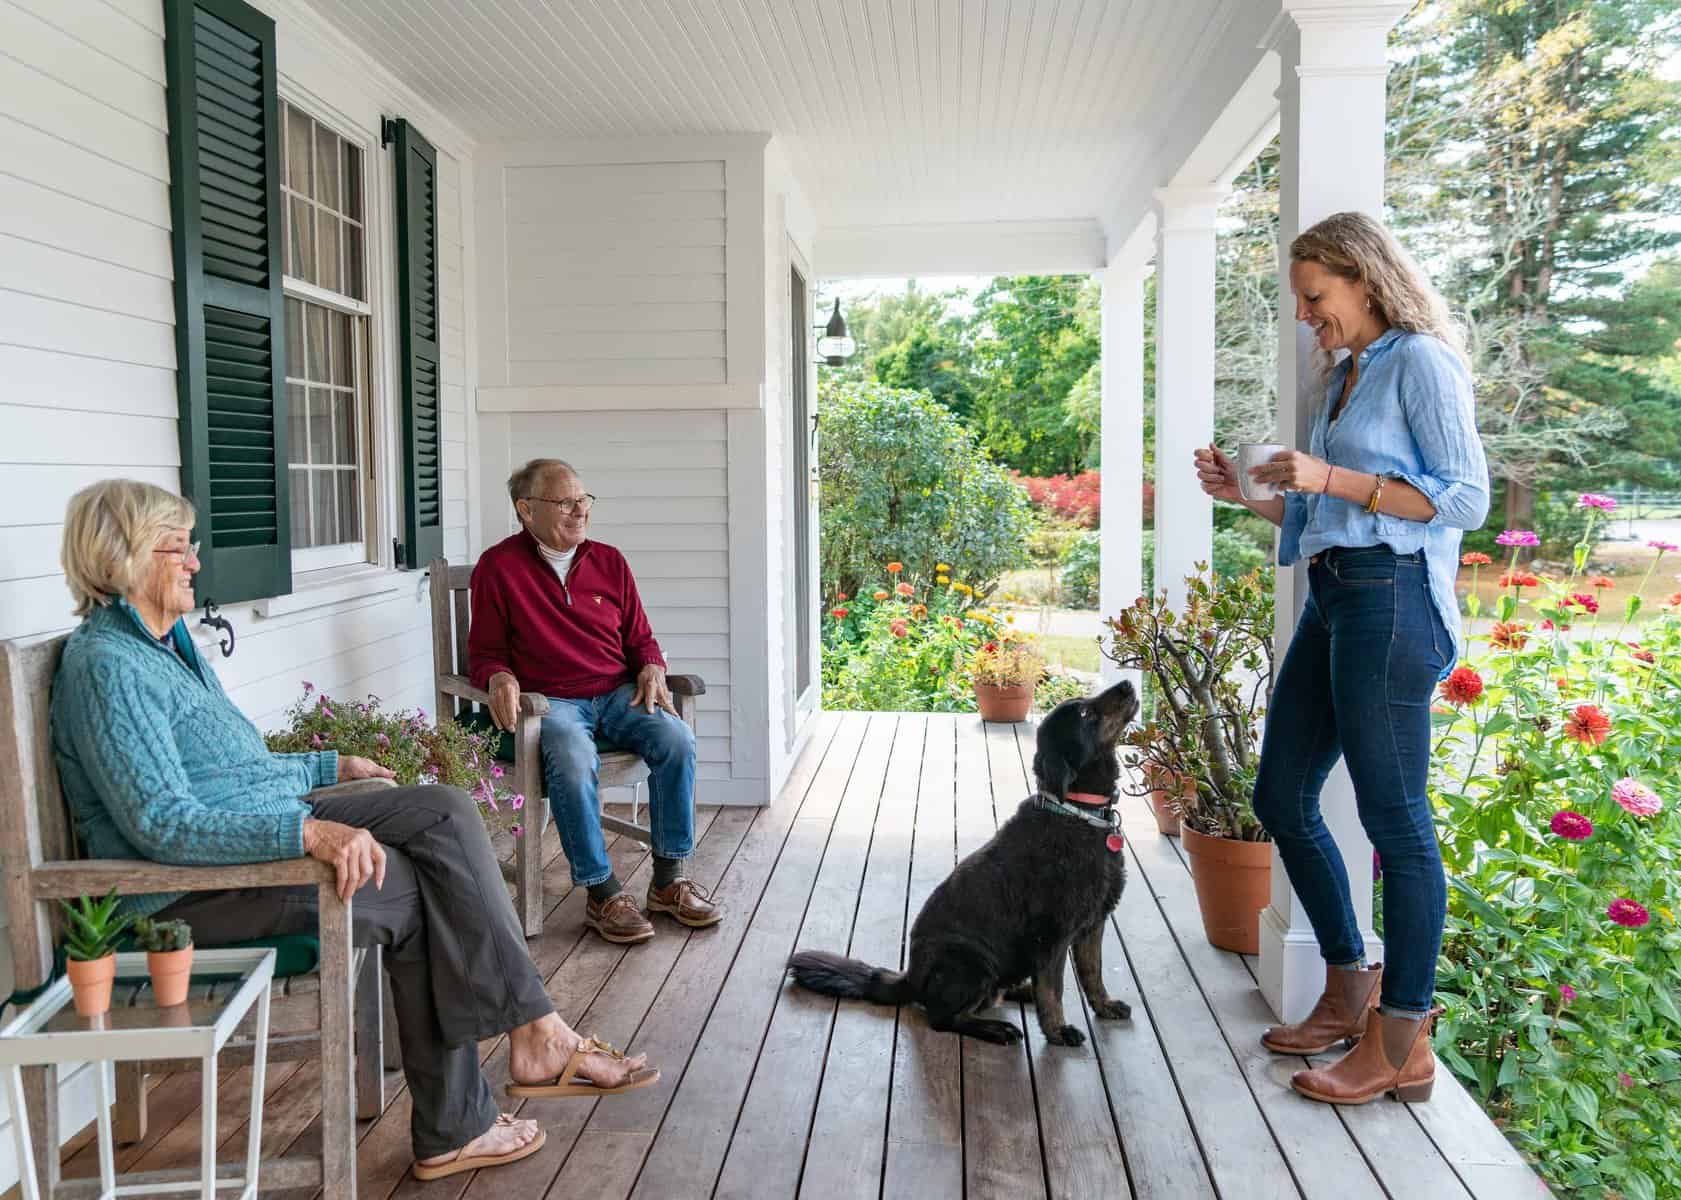 The family often gathers on the porch, which connects the old and new spaces.